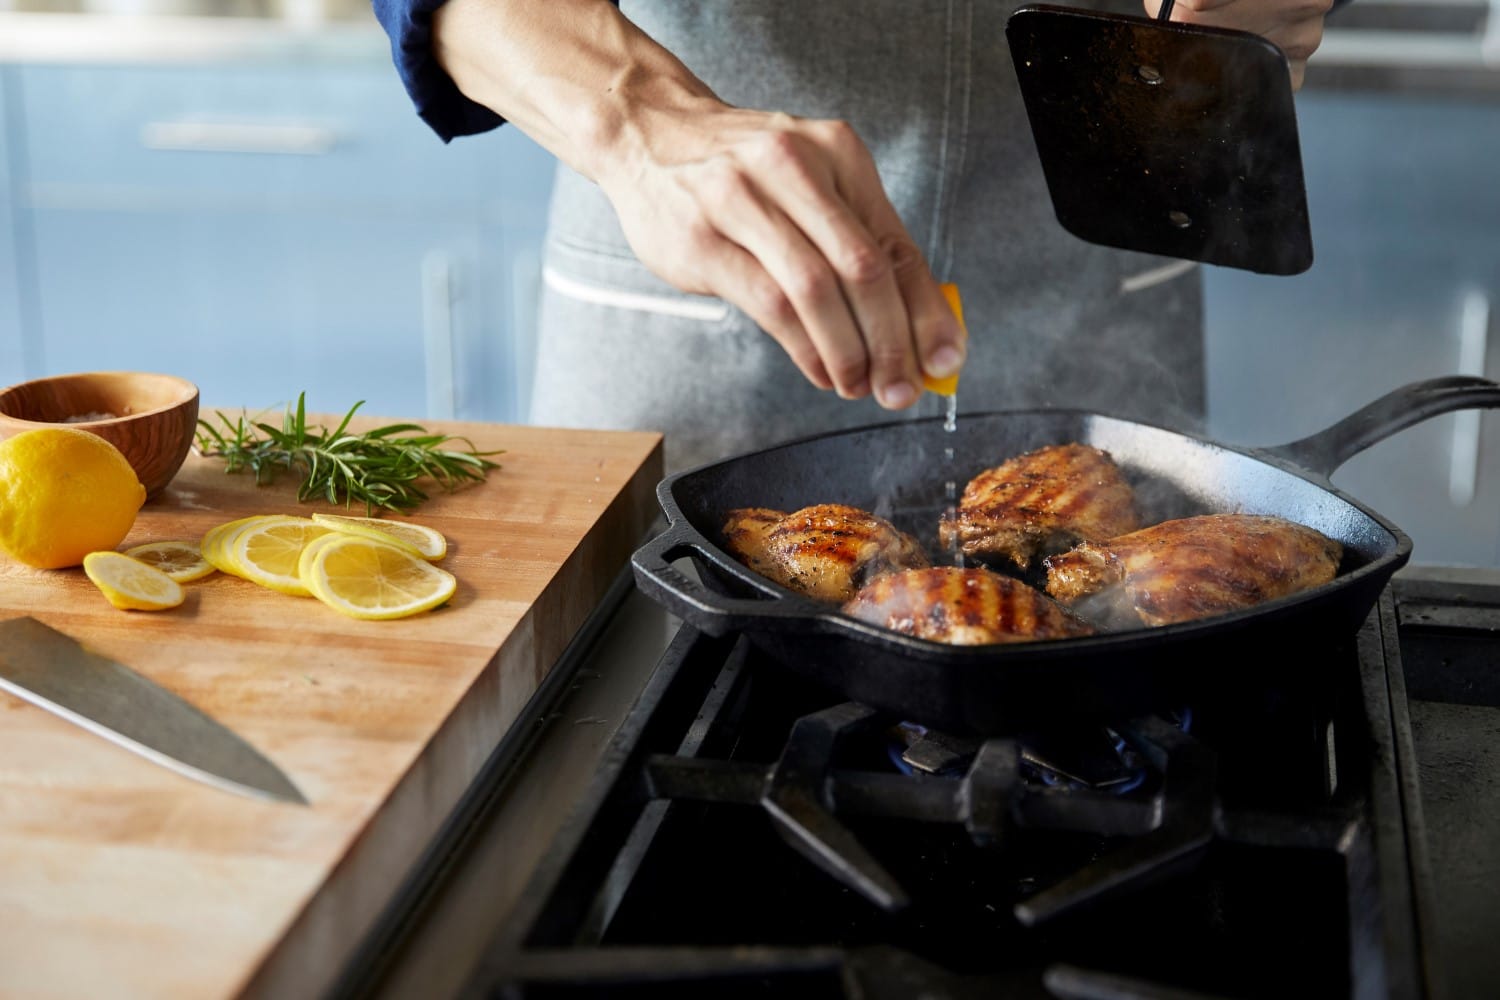 Kitchen Staples: The Essentials to Cook Practically Everything